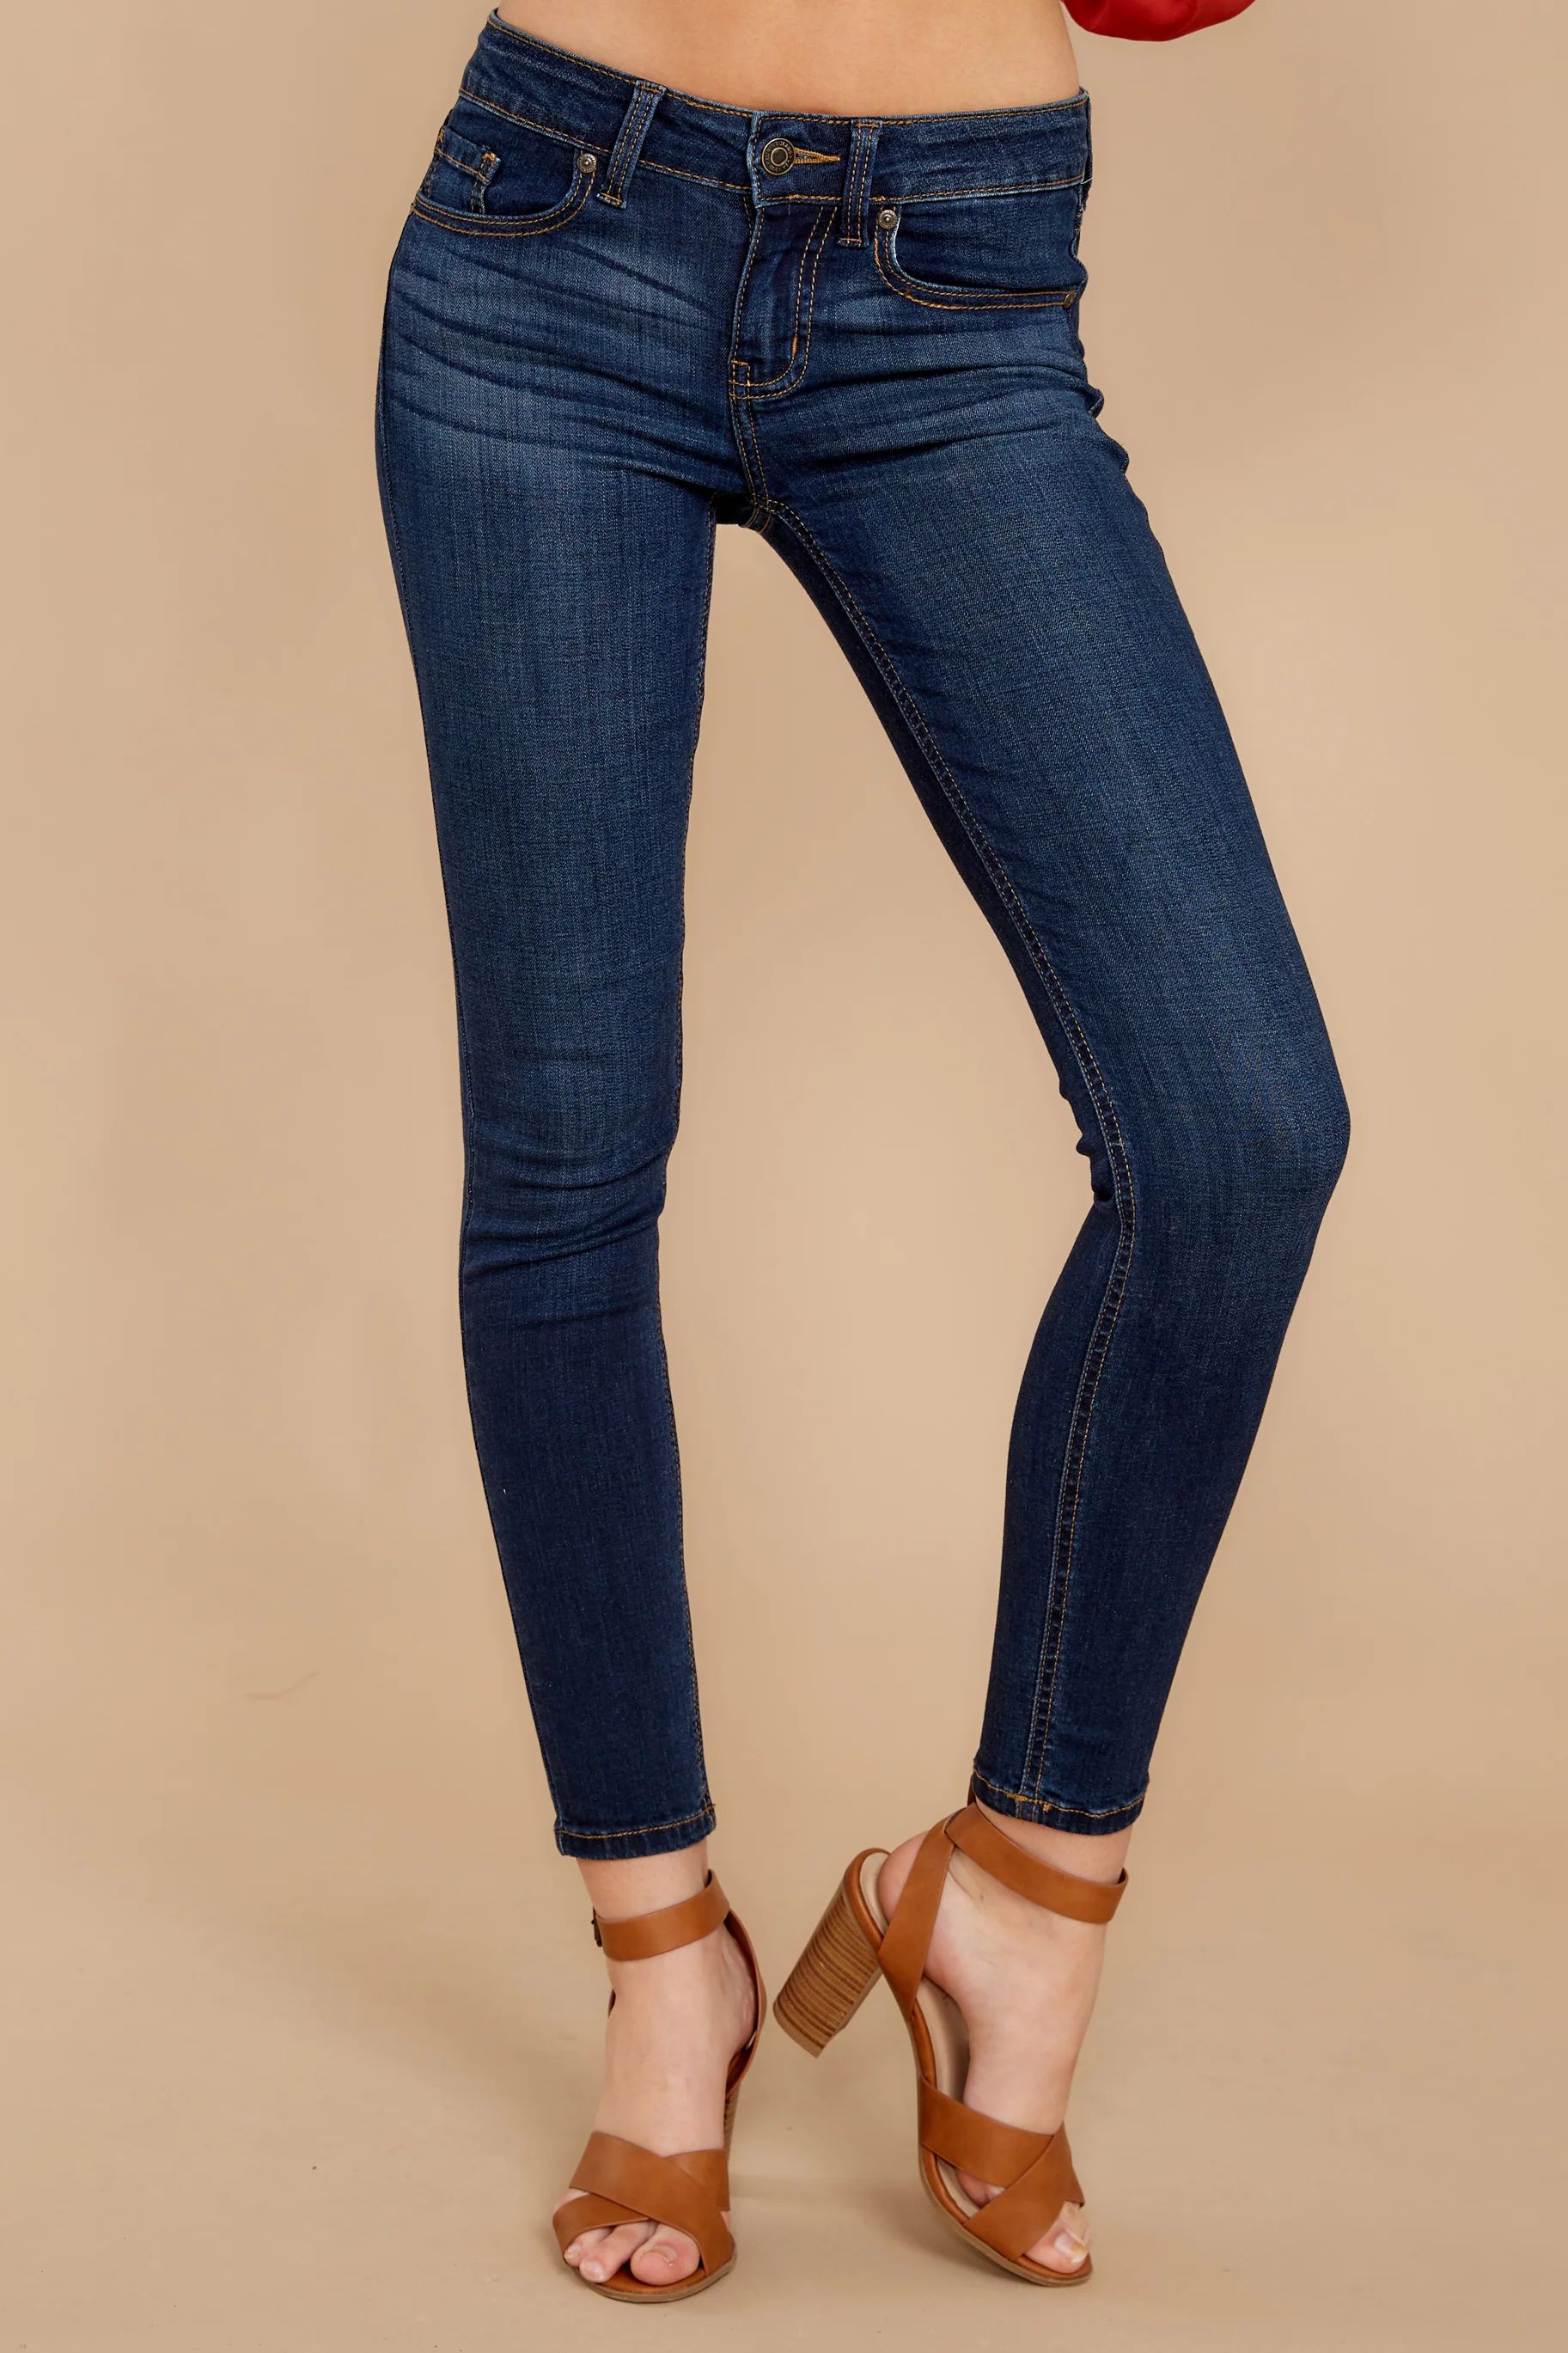 New In Town Dark Wash Skinny Jeans Blue | Red Dress 